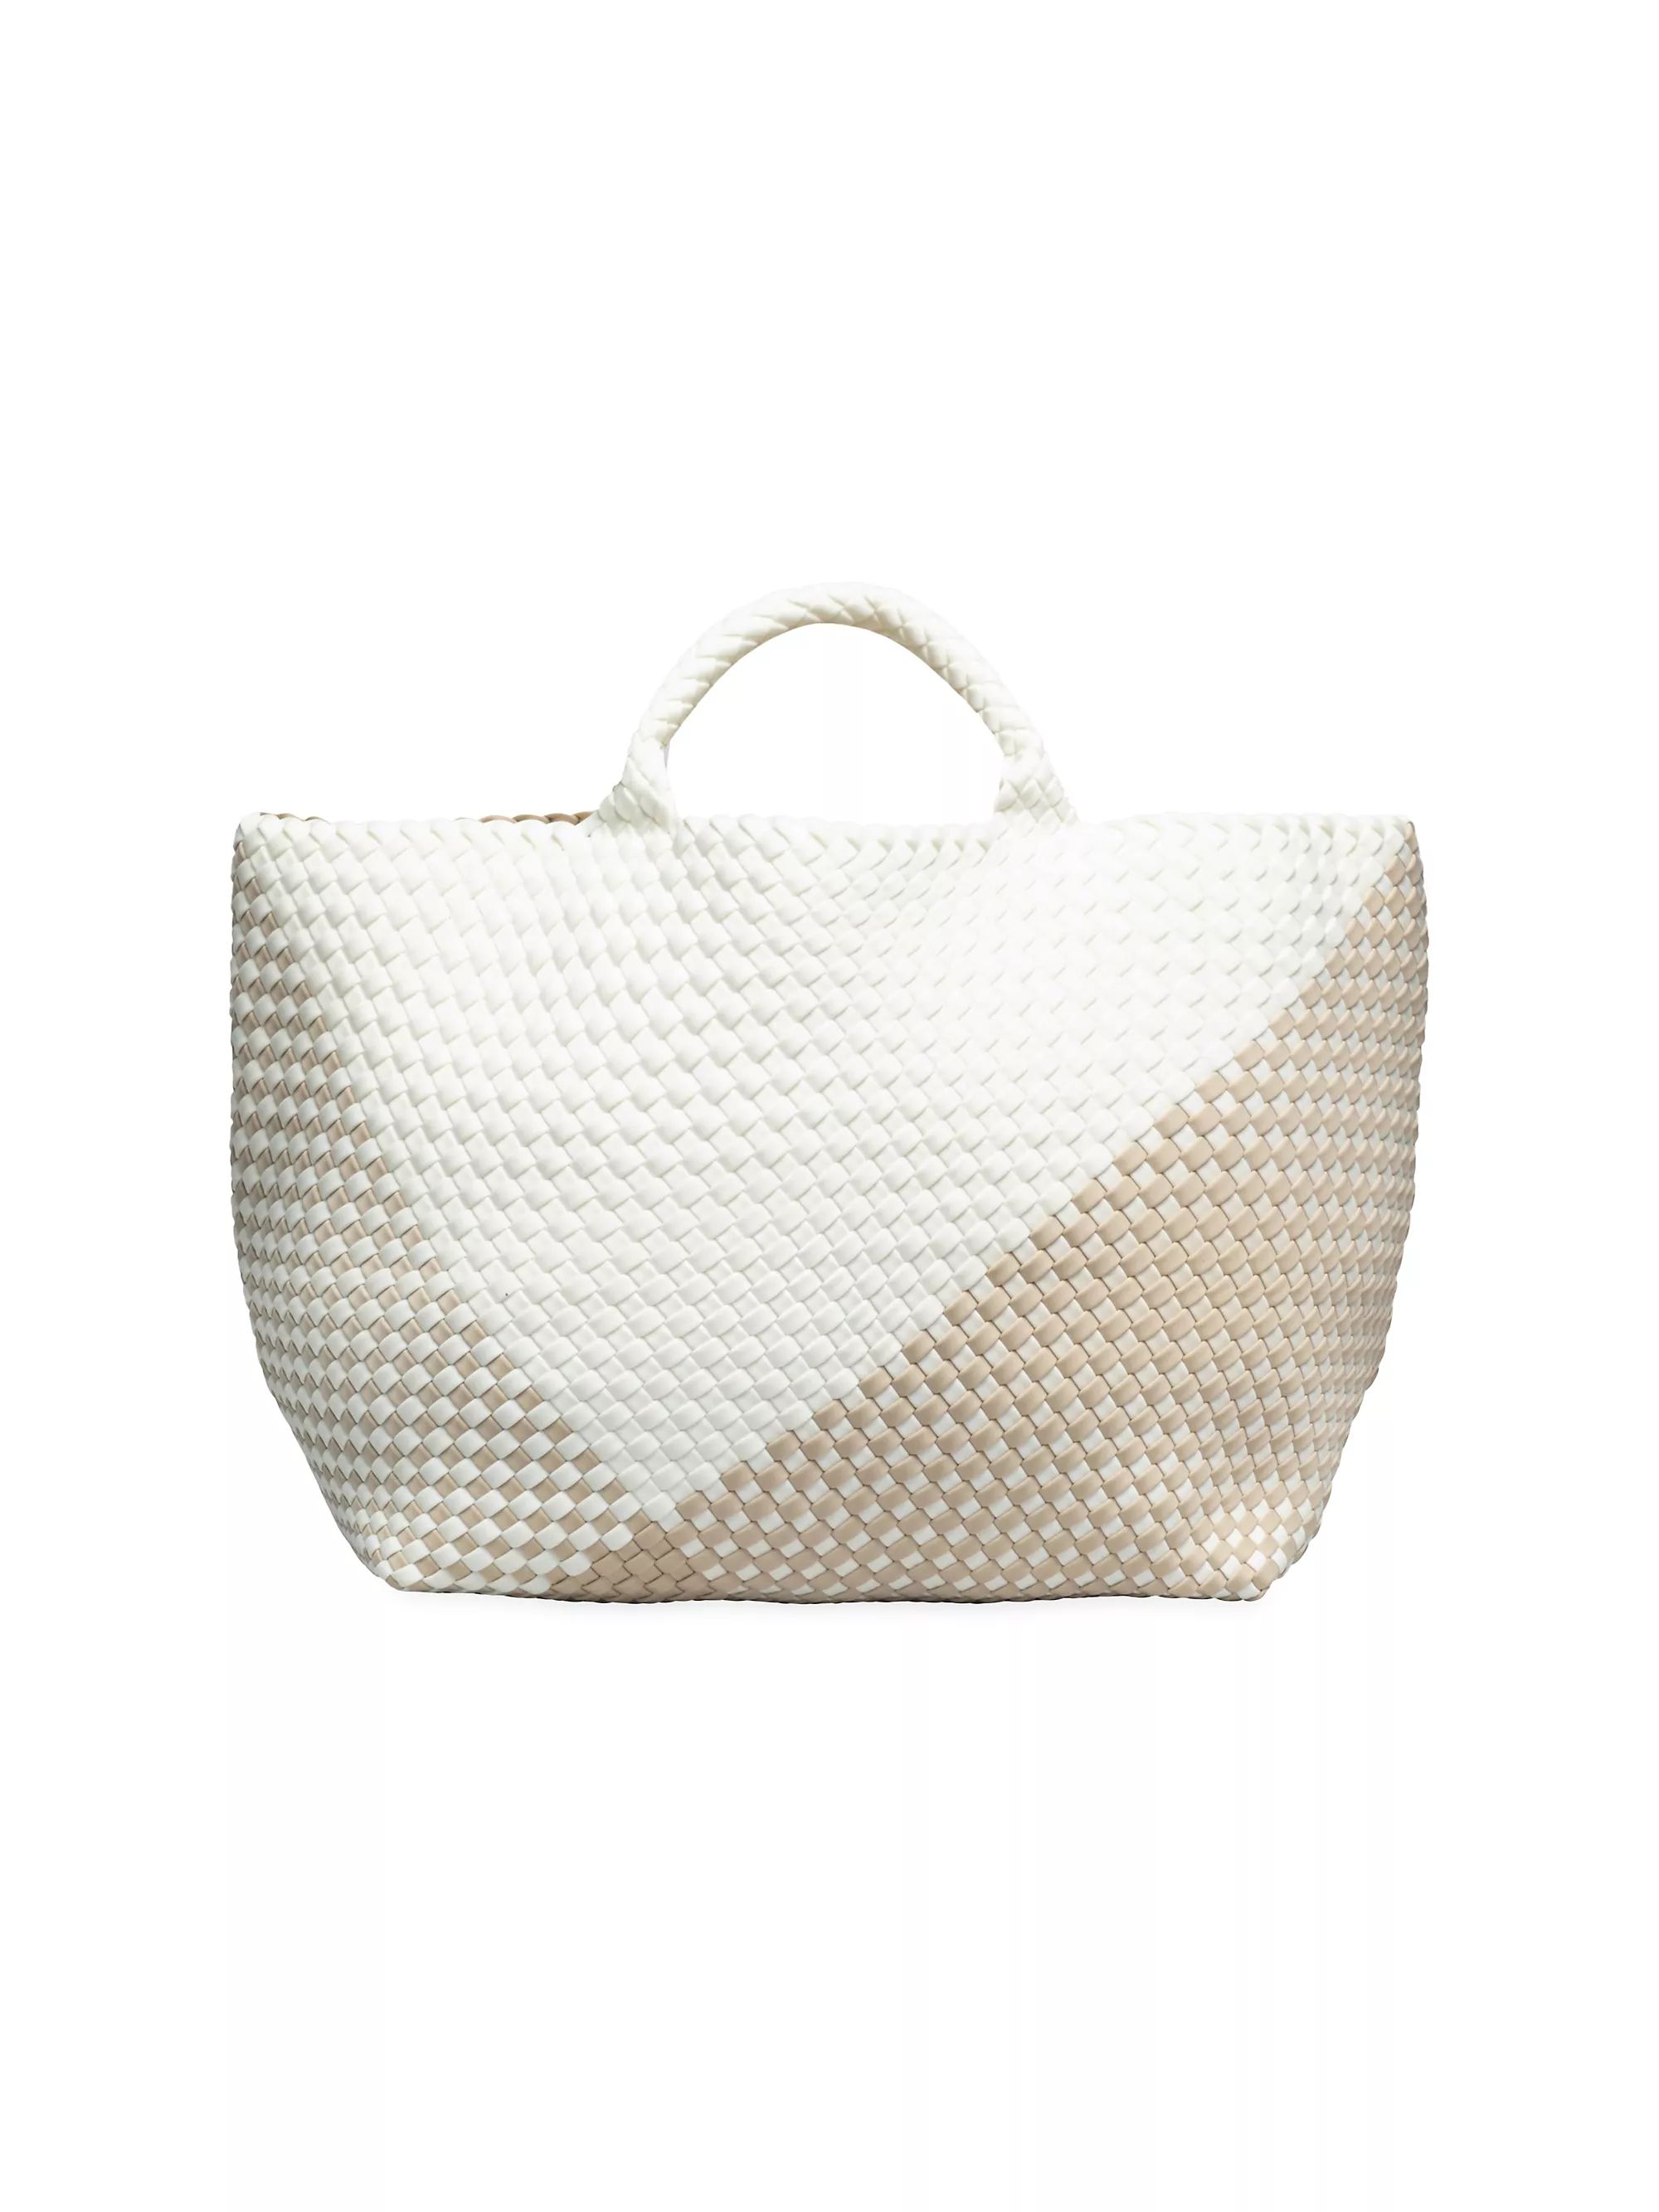 St. Barths Large Graphic Geo Tote Bag | Saks Fifth Avenue